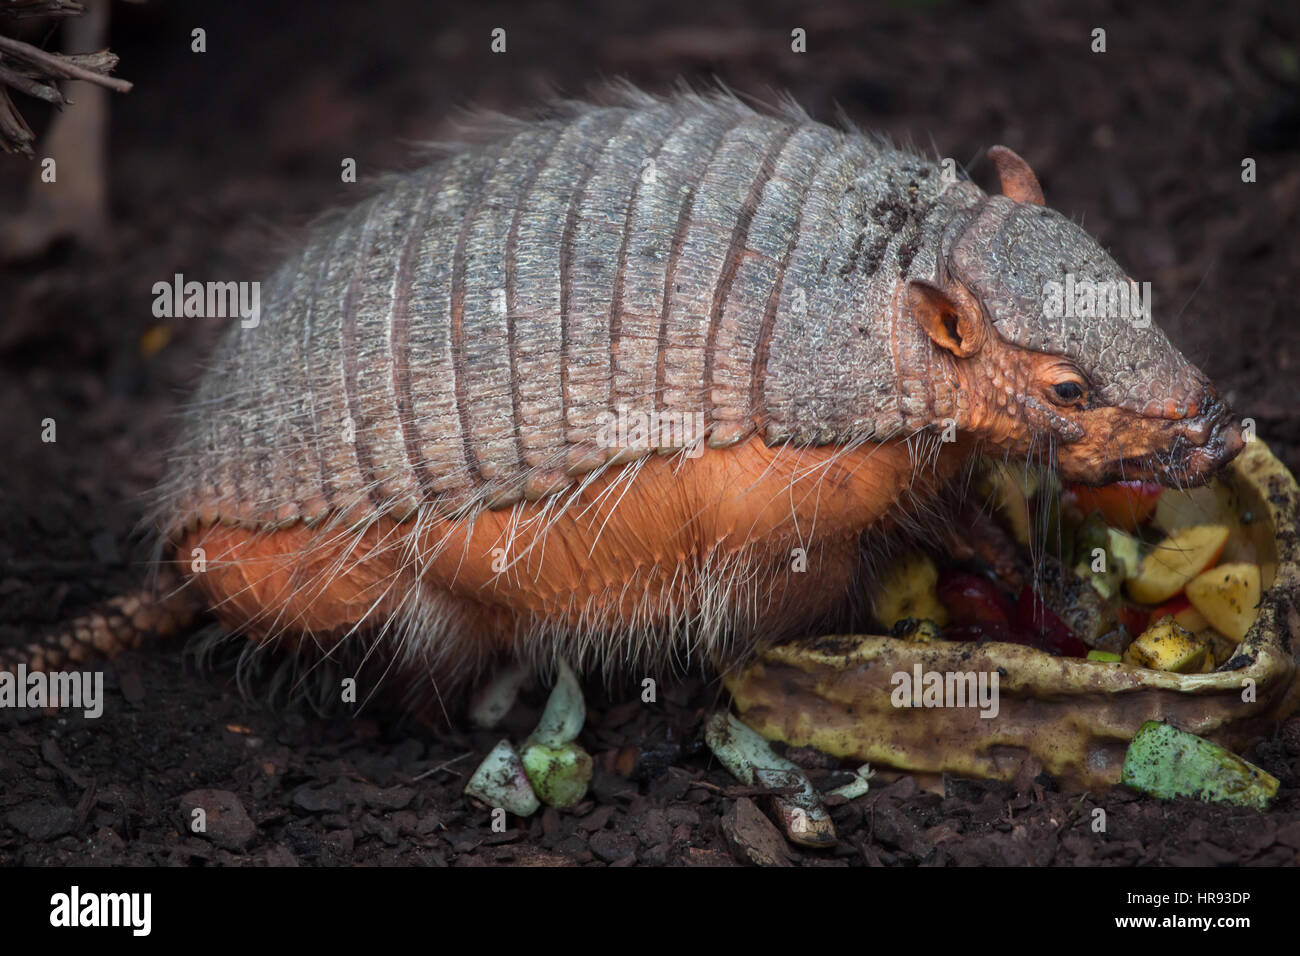 Big hairy armadillo (Chaetophractus villosus), also known as the large hairy armadillo. Stock Photo